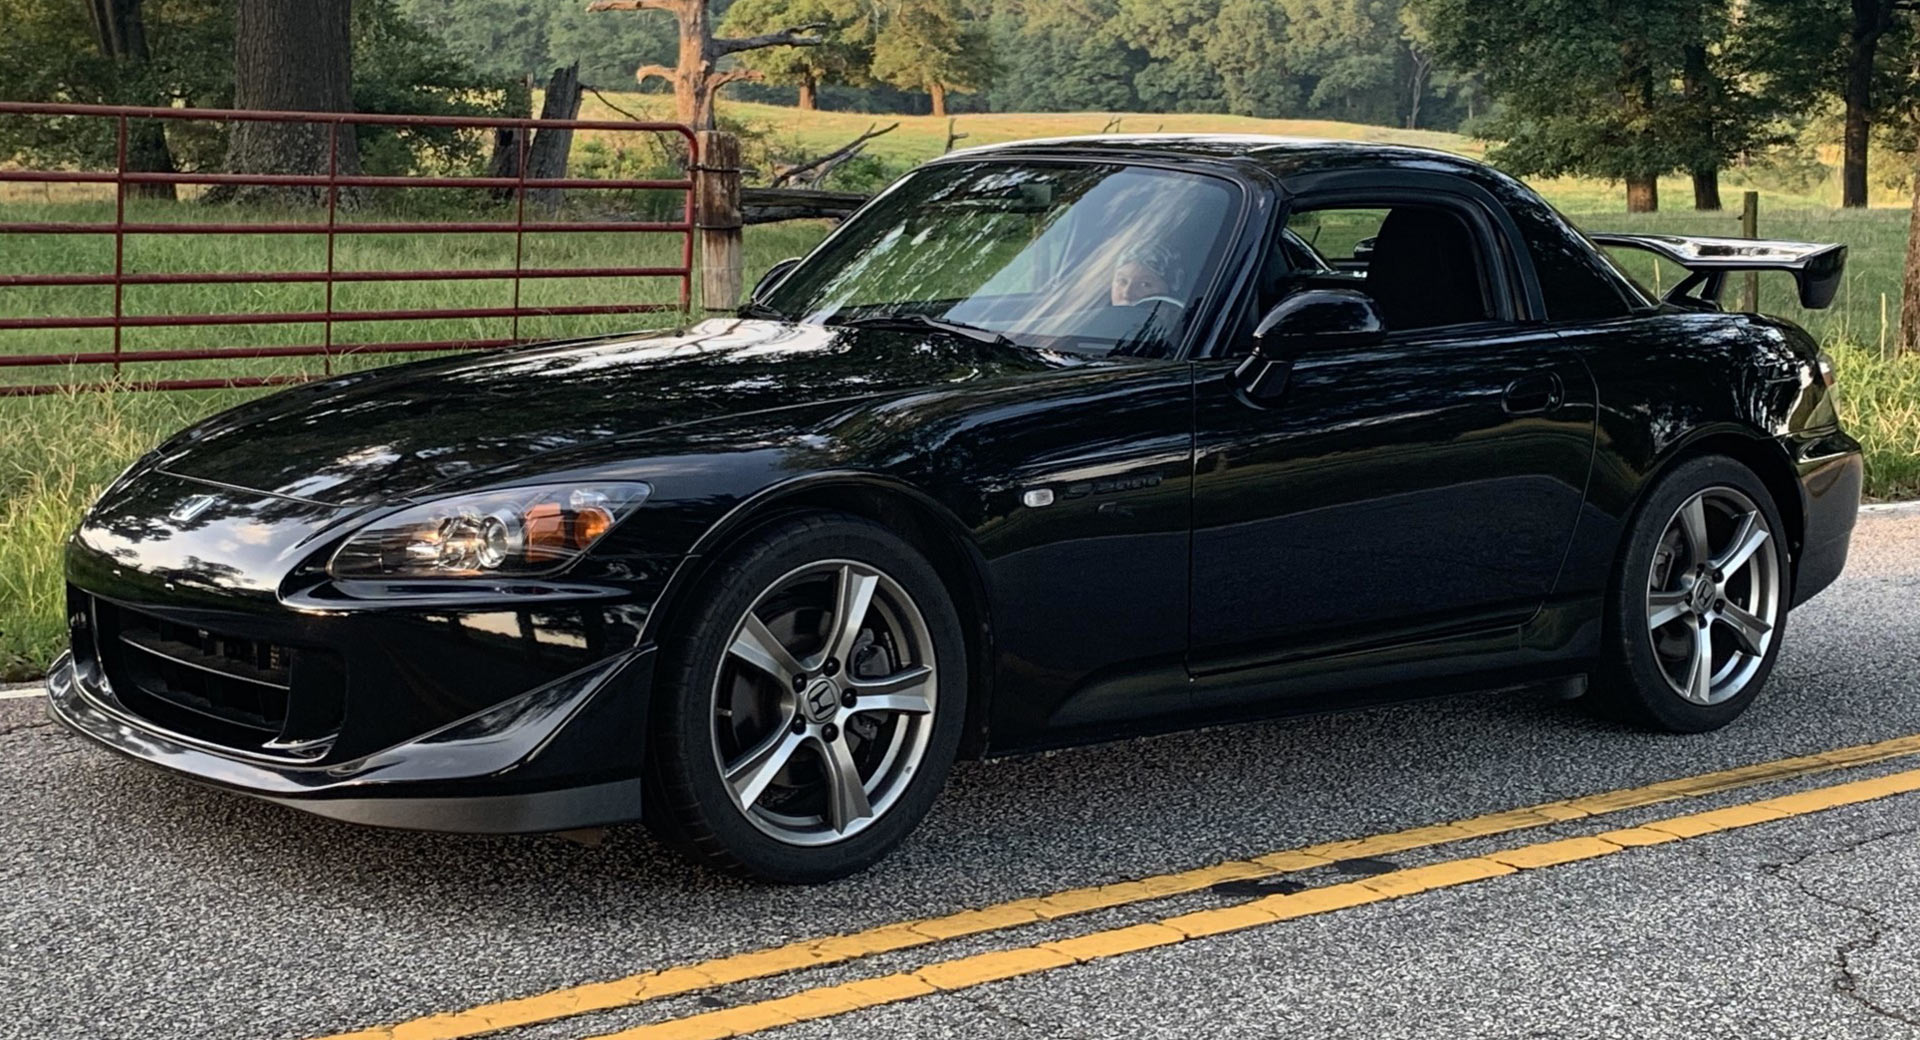 Black Honda S2000 Club Racer Is Very Rare, Desirable, And Relatively